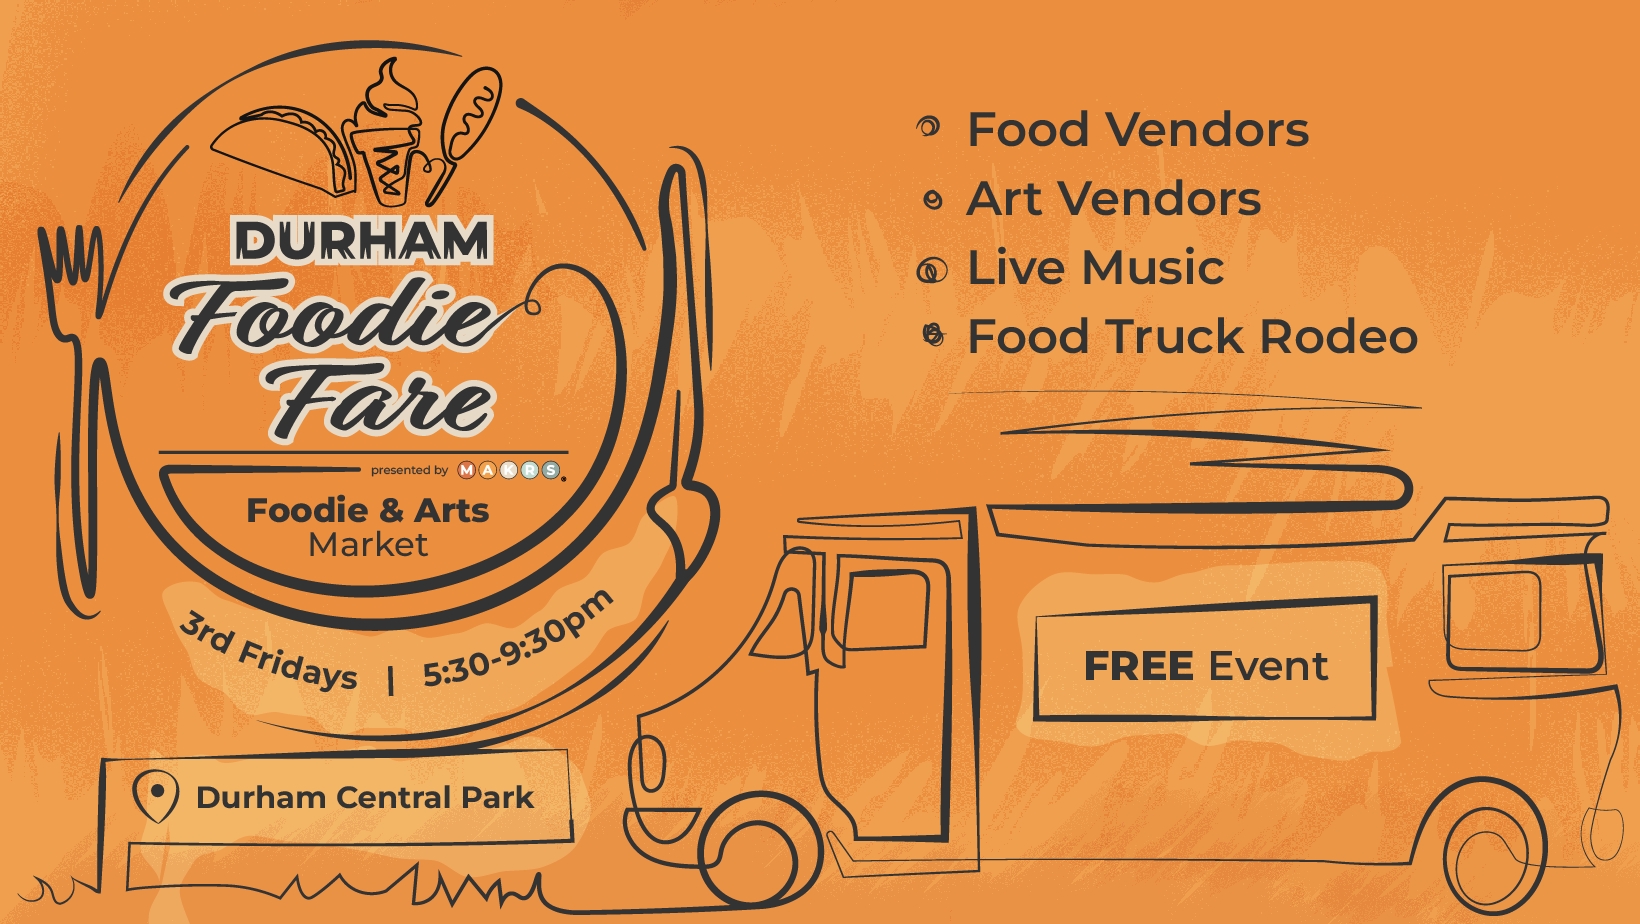 Durham Foodie Fare cover image